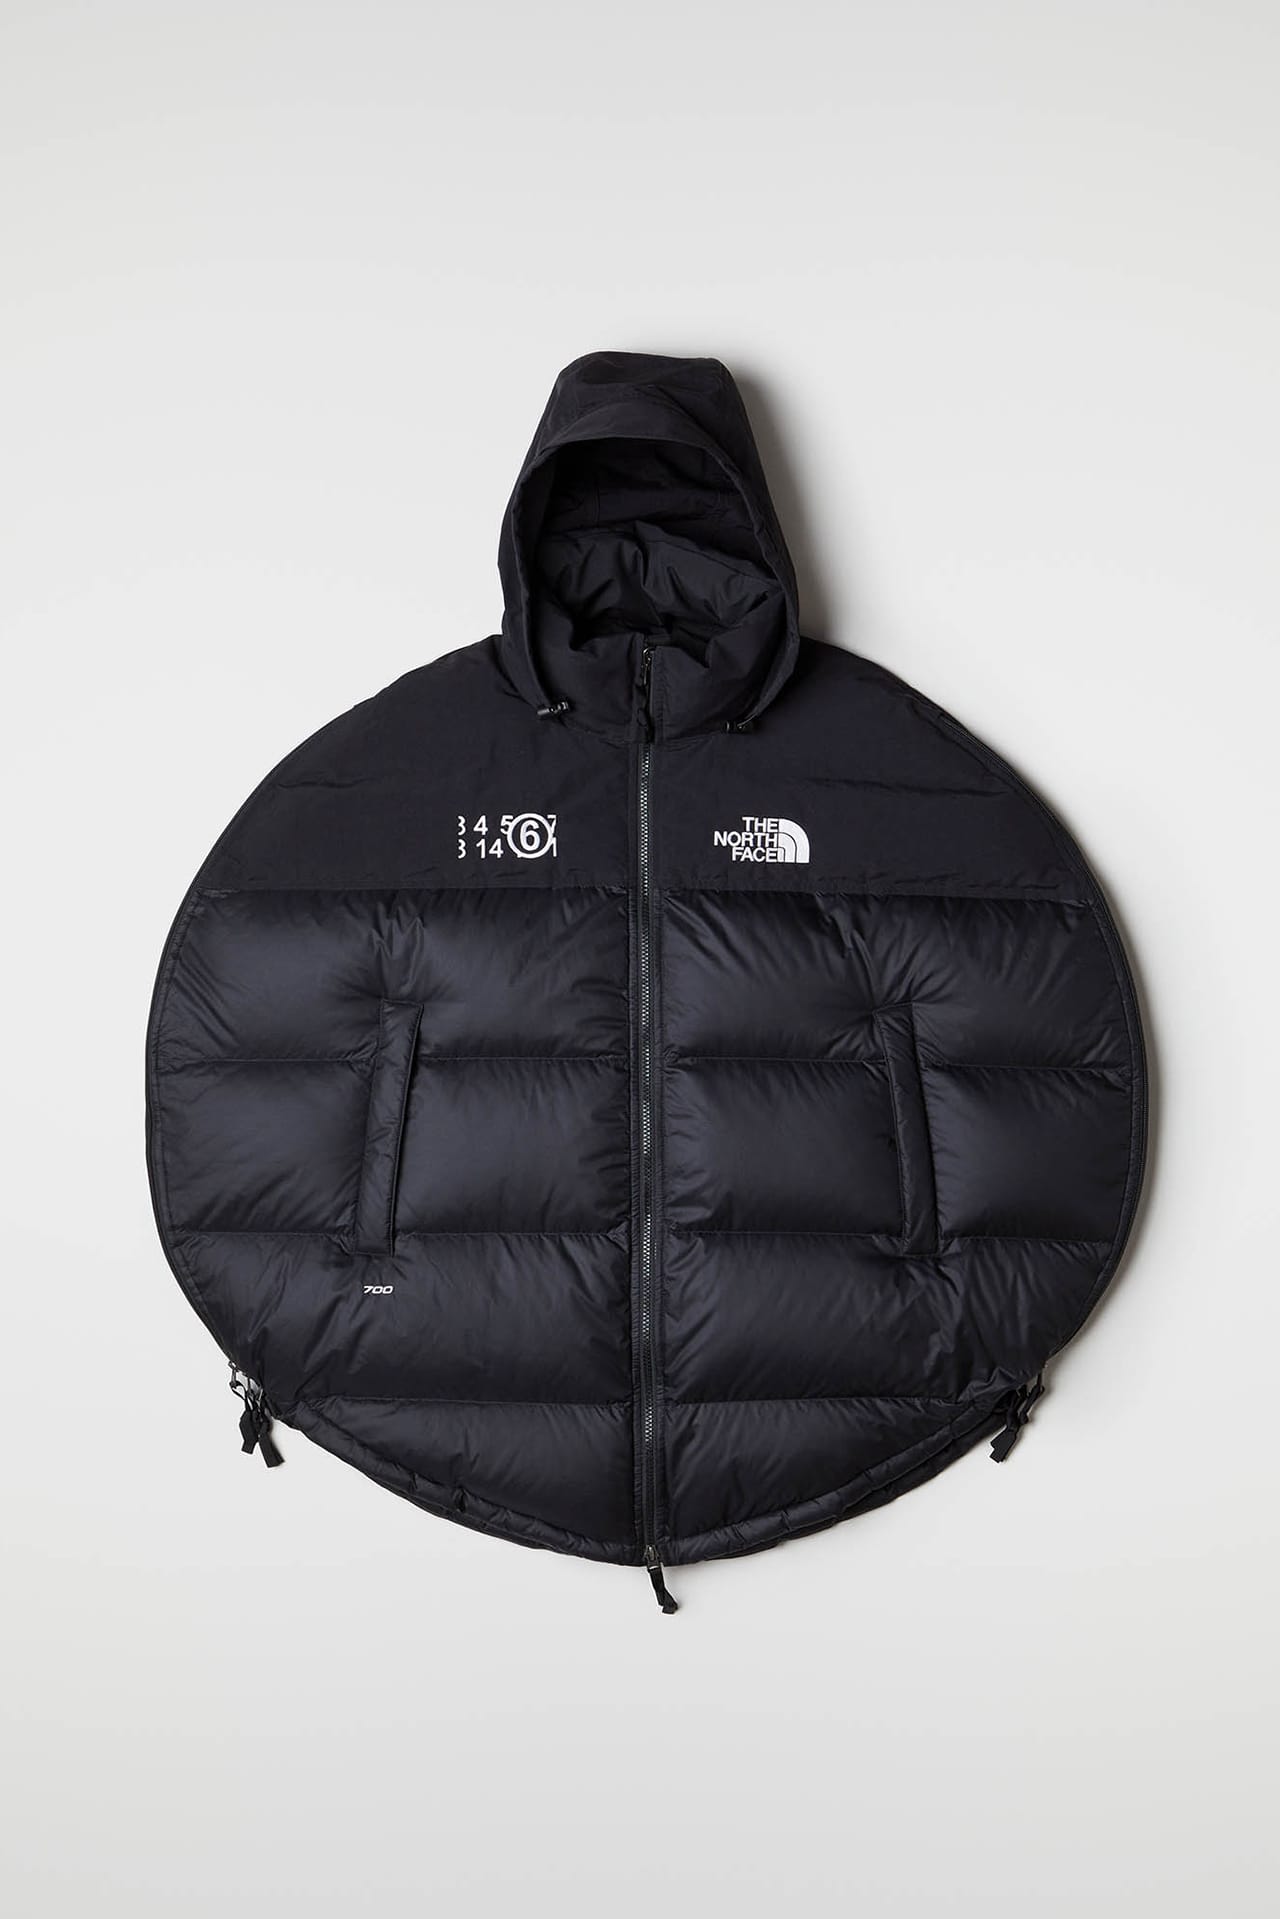 north face black puffer